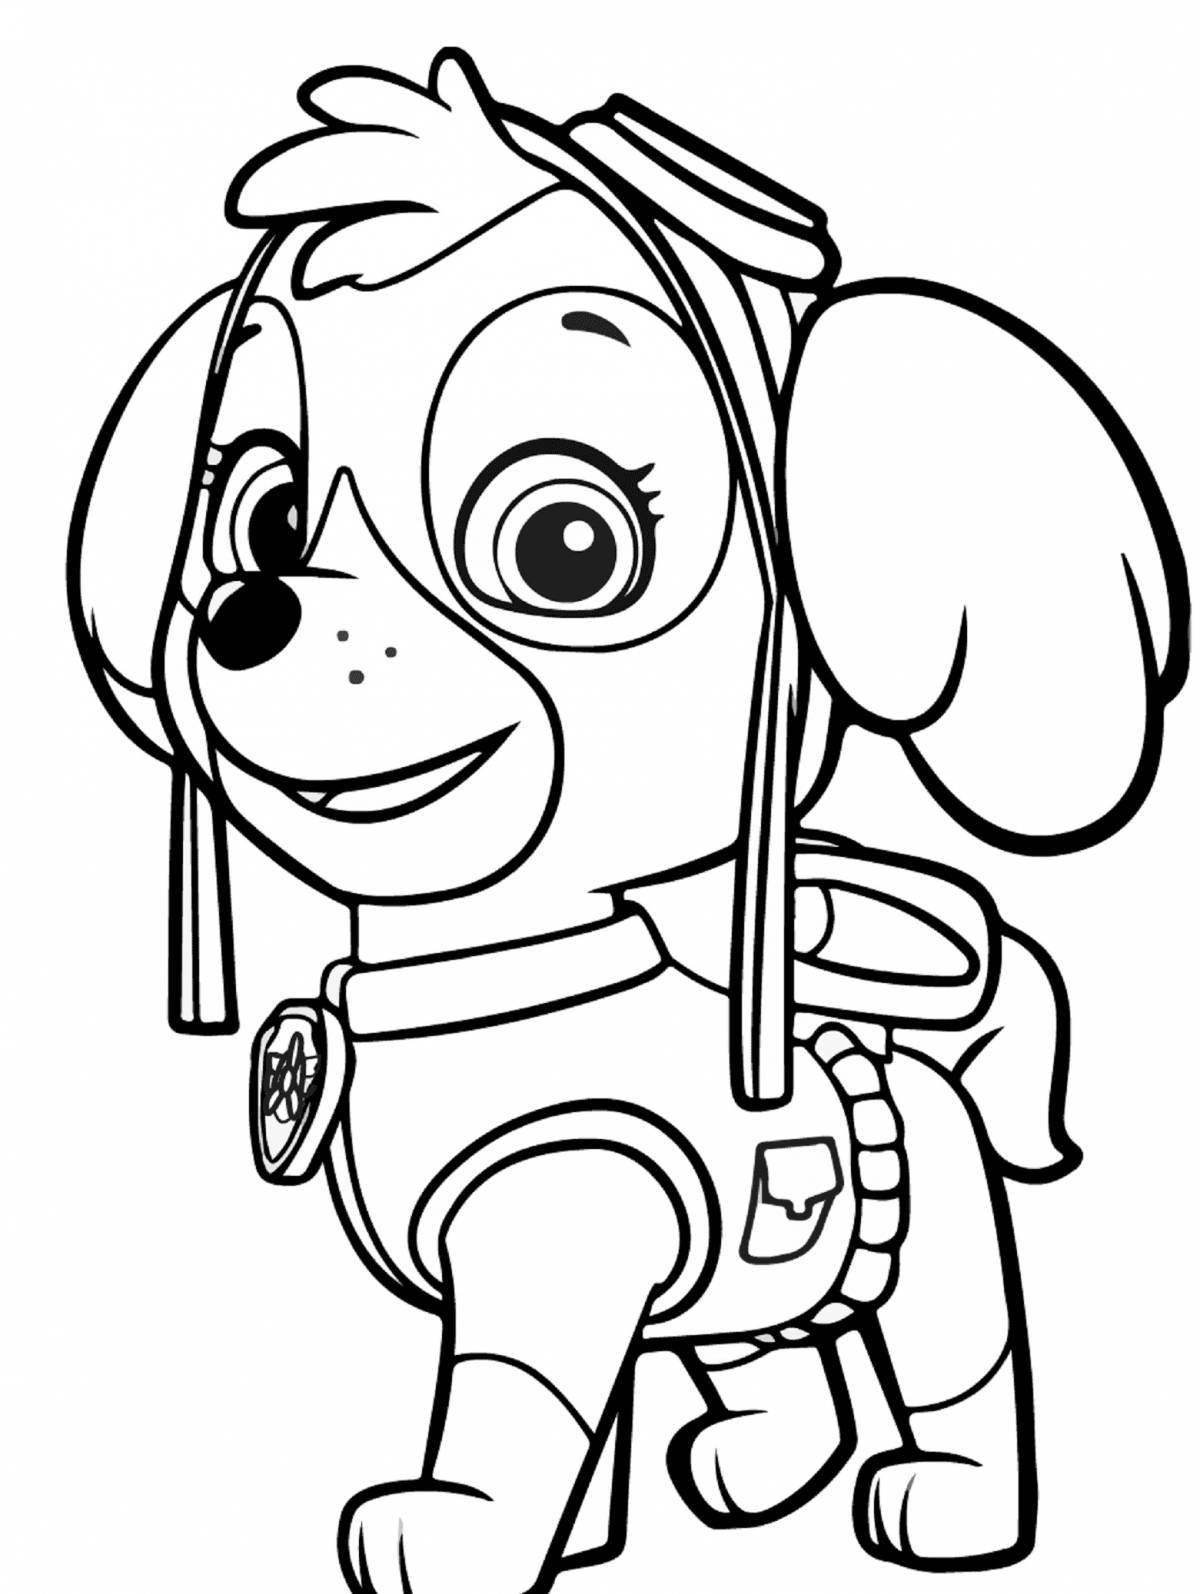 Amazing Paw Patrol Coloring Page for Toddlers